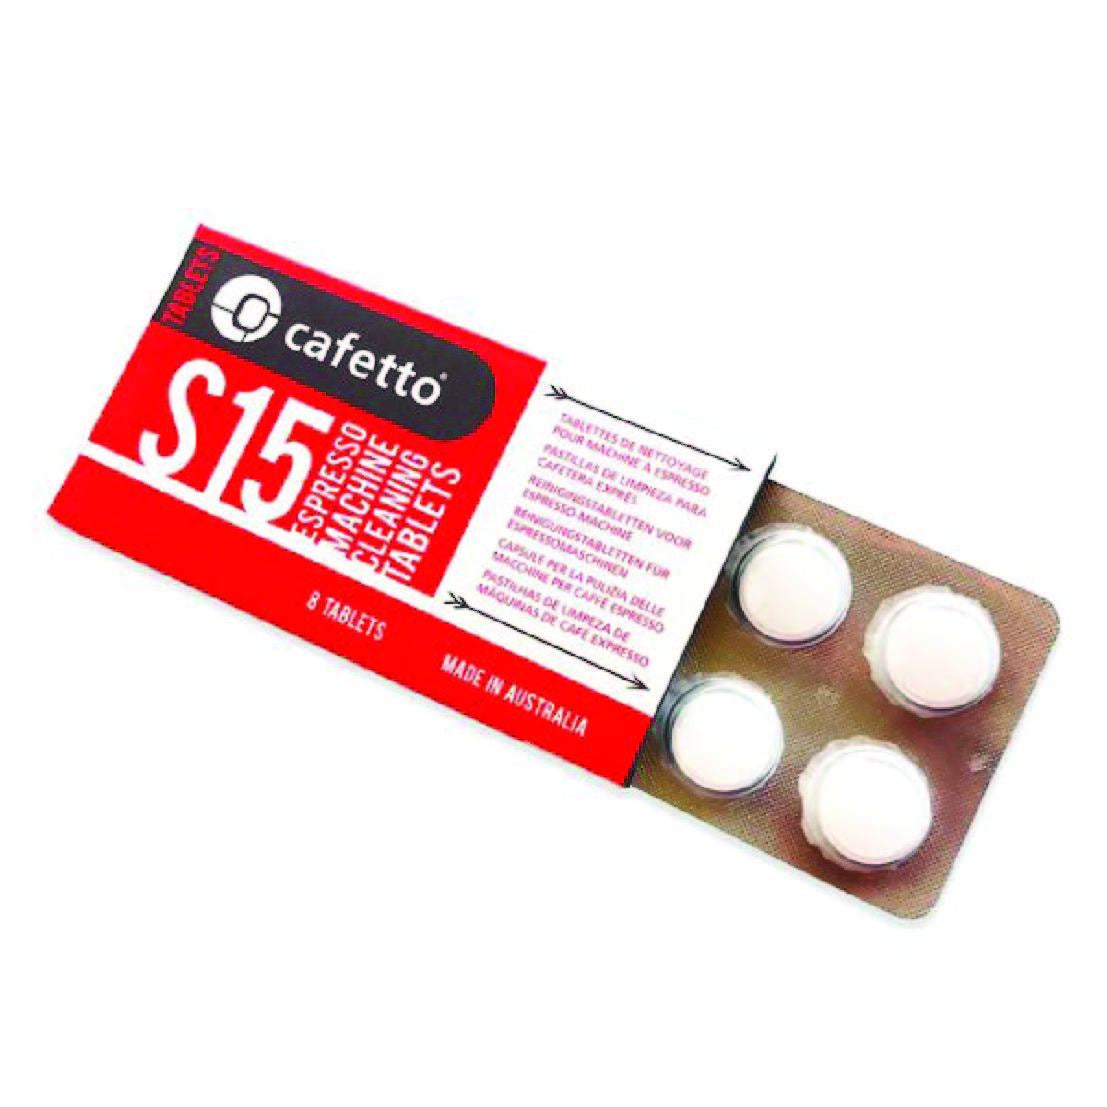 CAFETTO - S15 Cleaning Tablets (8)